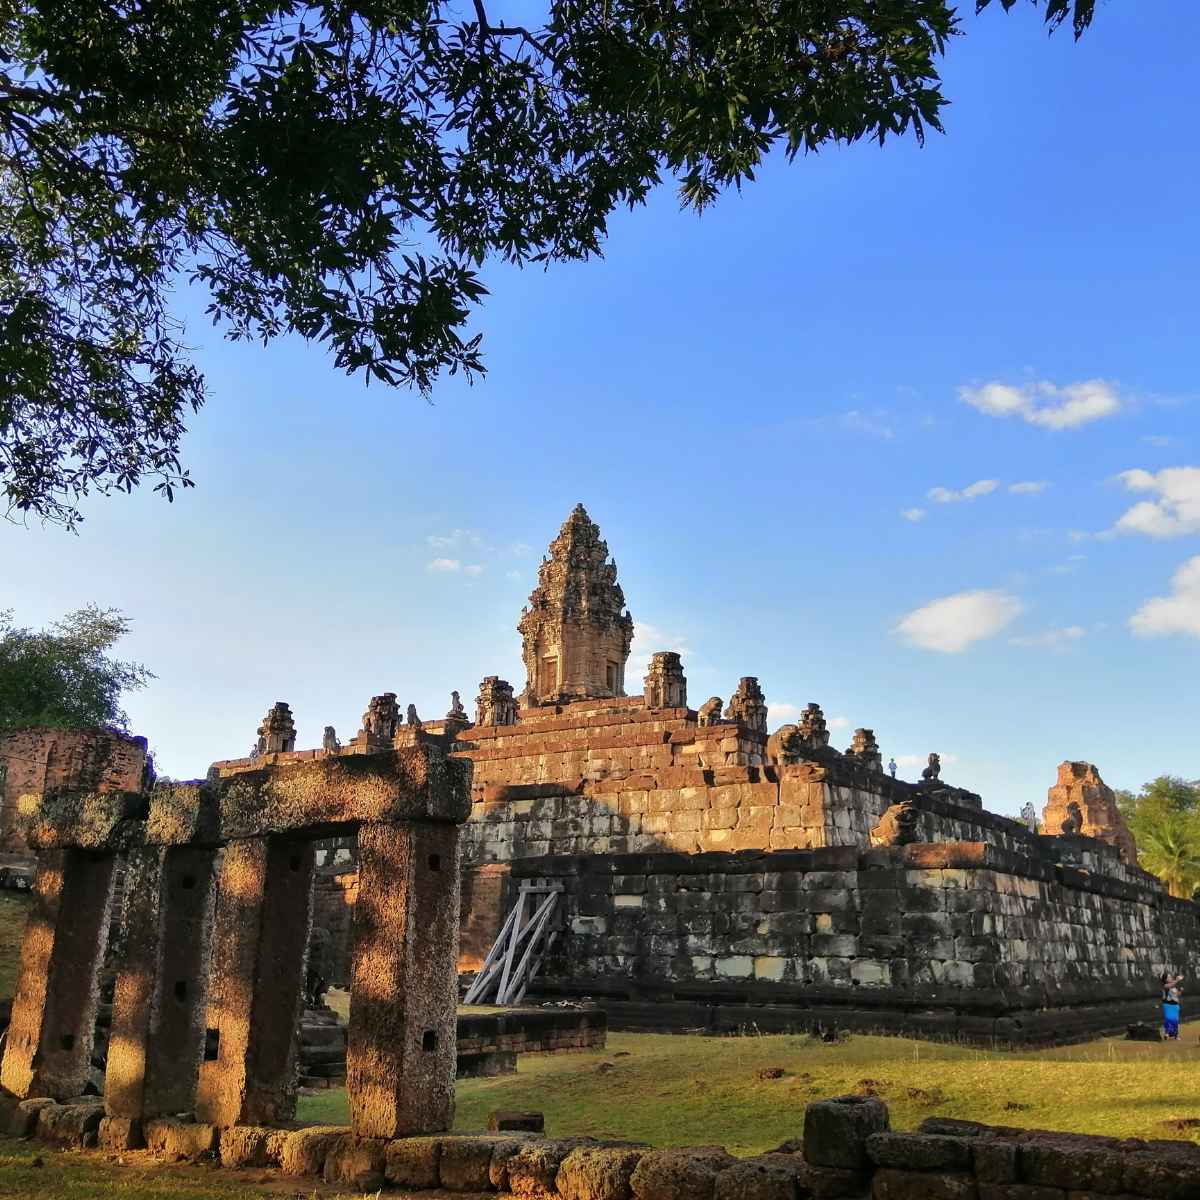 Siem Reap HomeStay 2 Day Tour - Your Top-Rated Tour to Live Like a Local